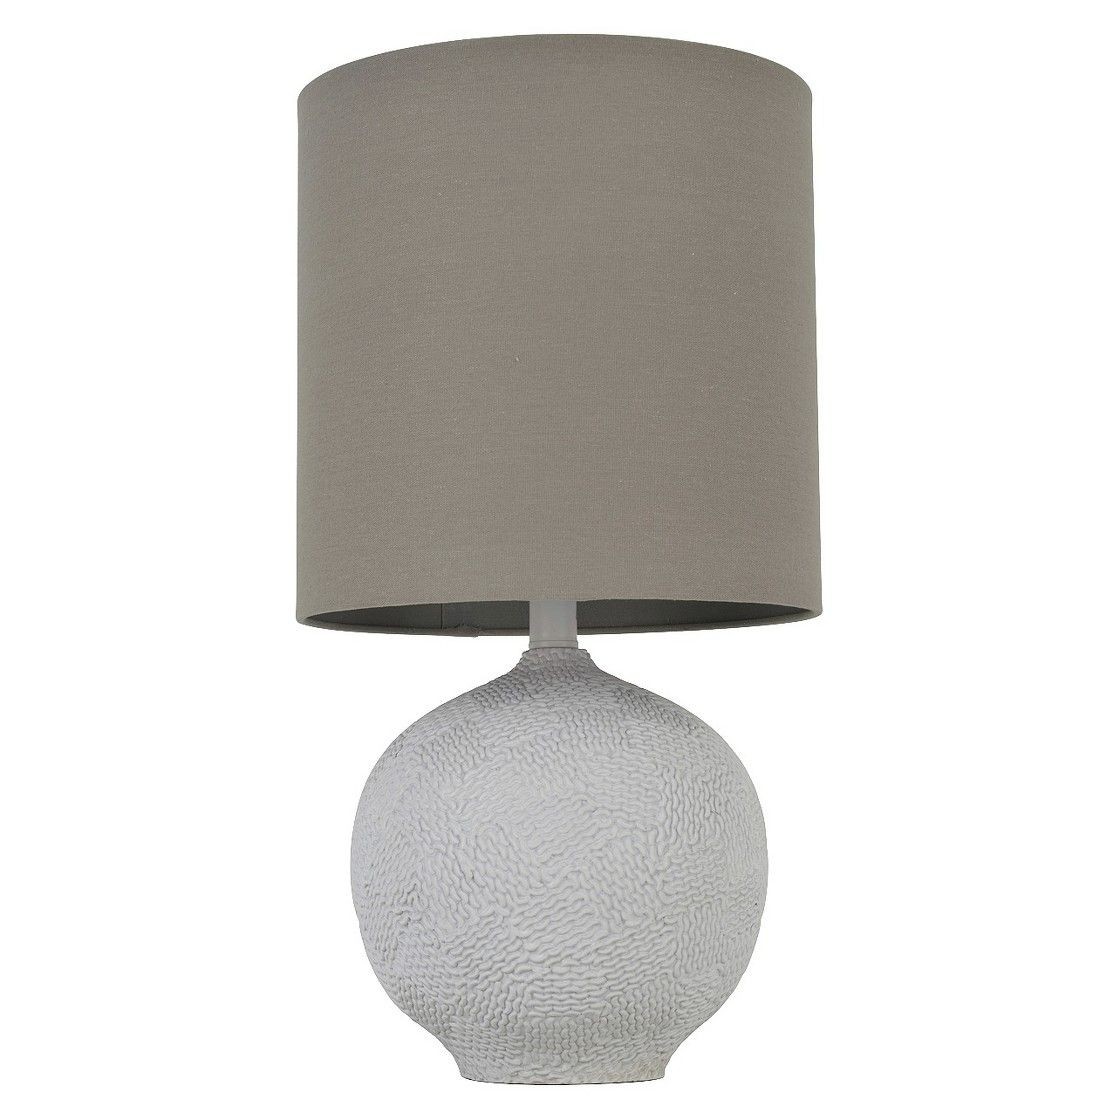 J hunt home table lamps 1